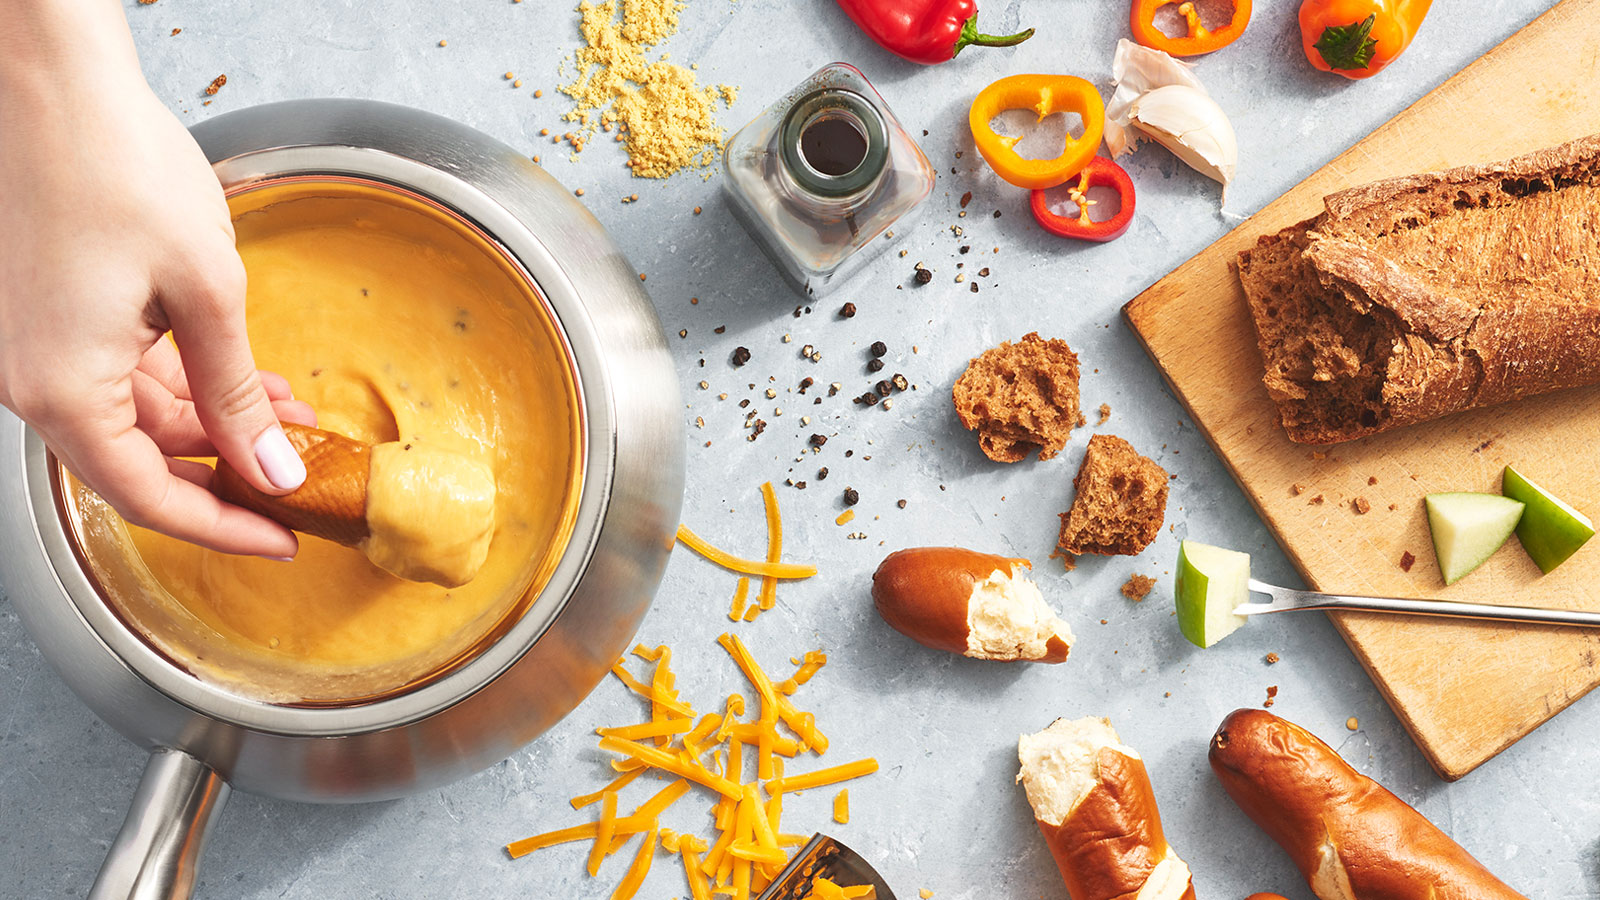 Cheddar Cheese Fondue and Ingredients